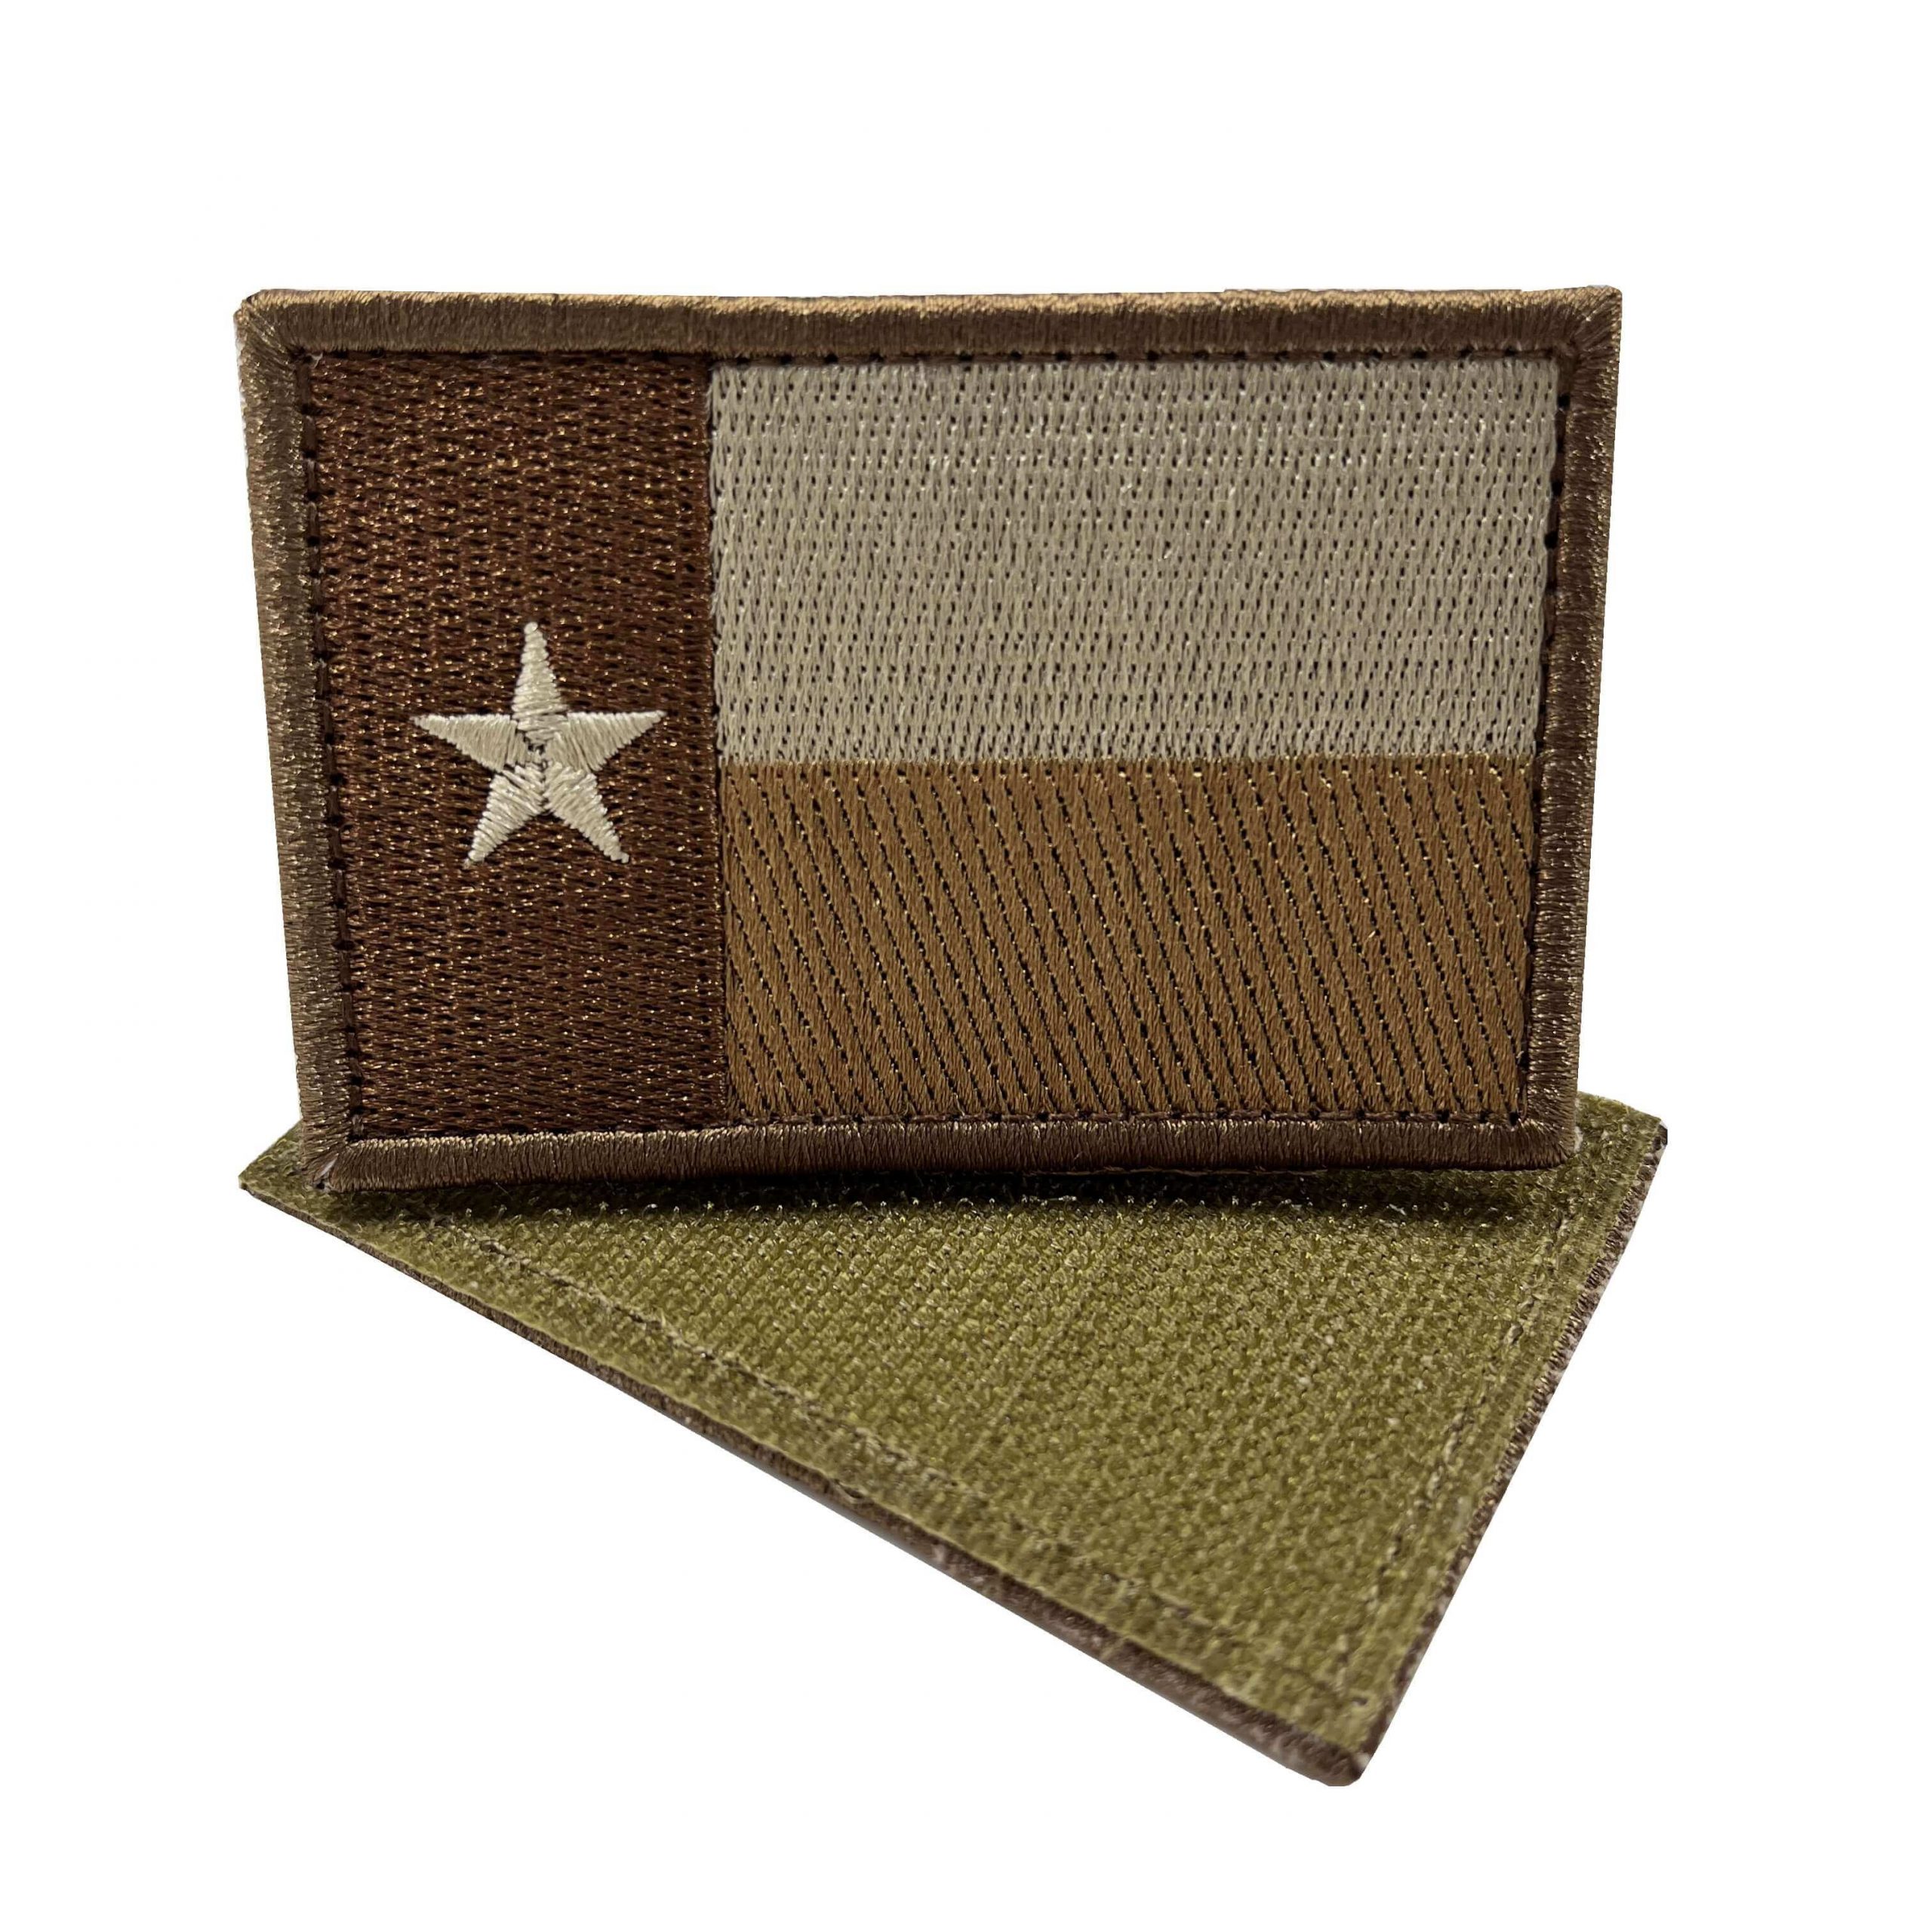 Embroidered Desert Texas Tactical Patch